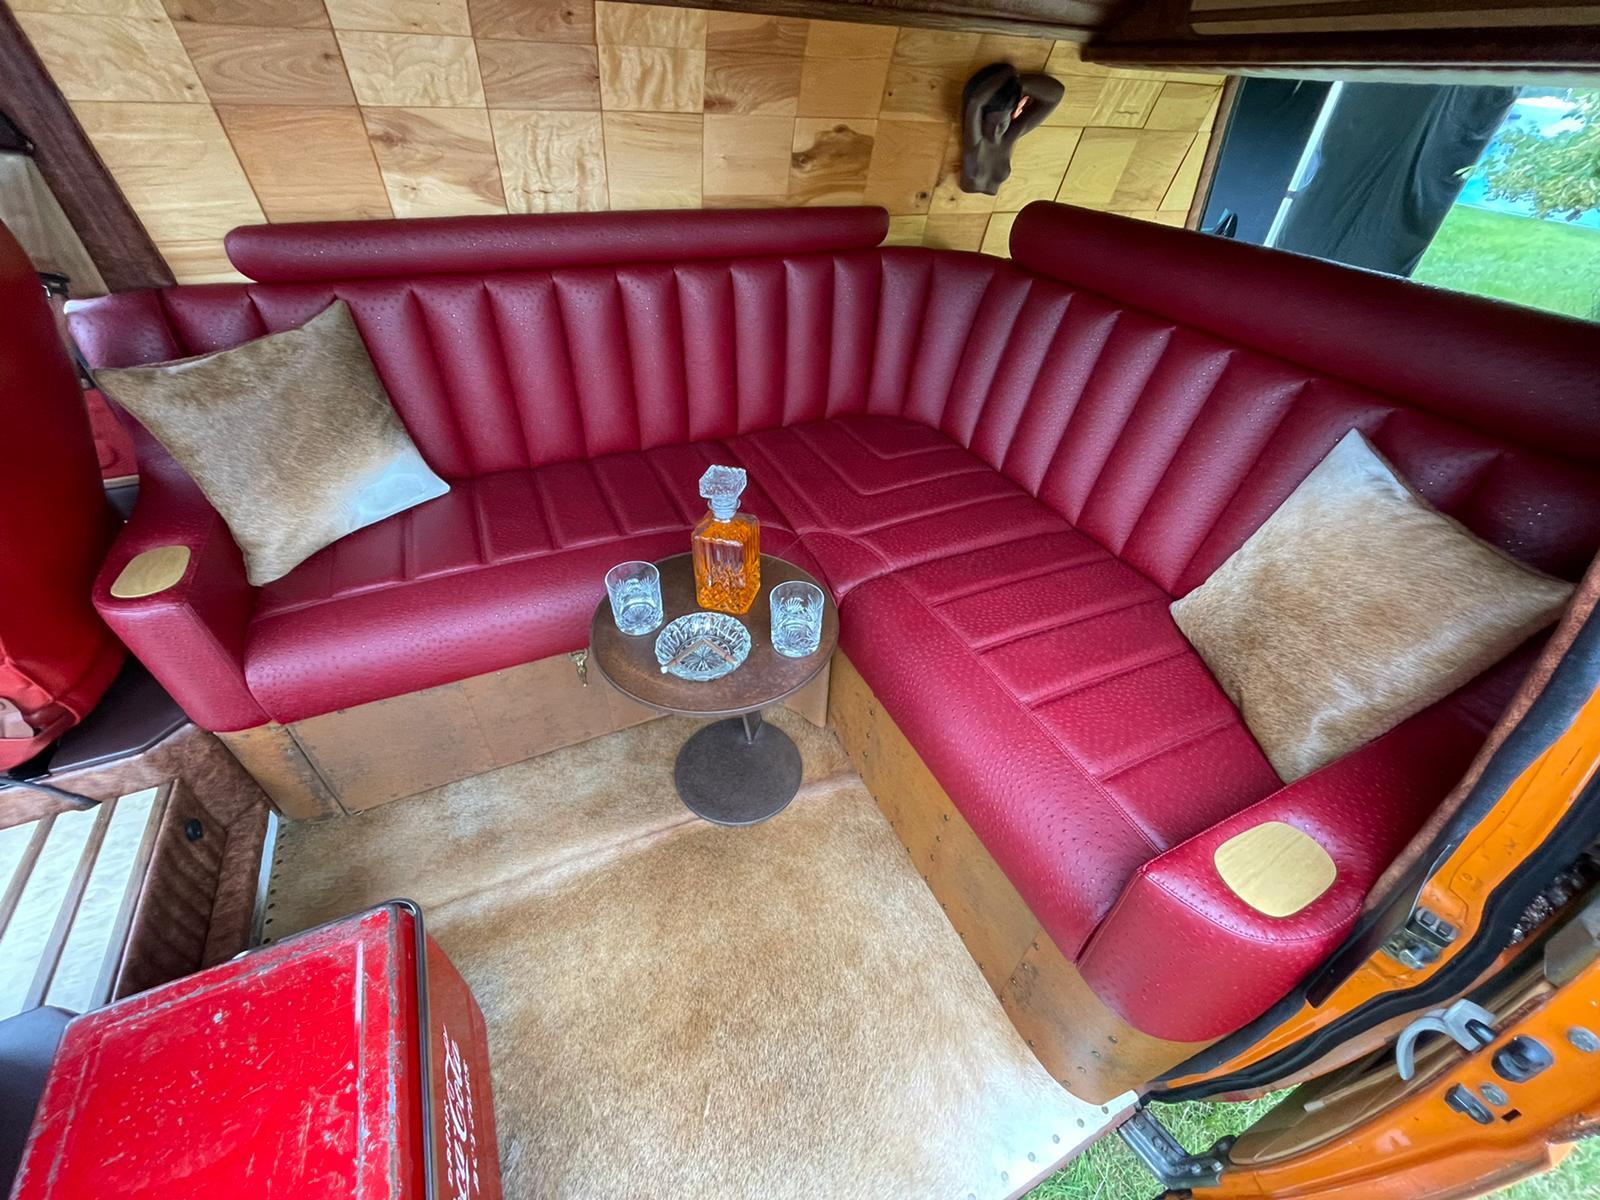 An example of a self-built camper interior